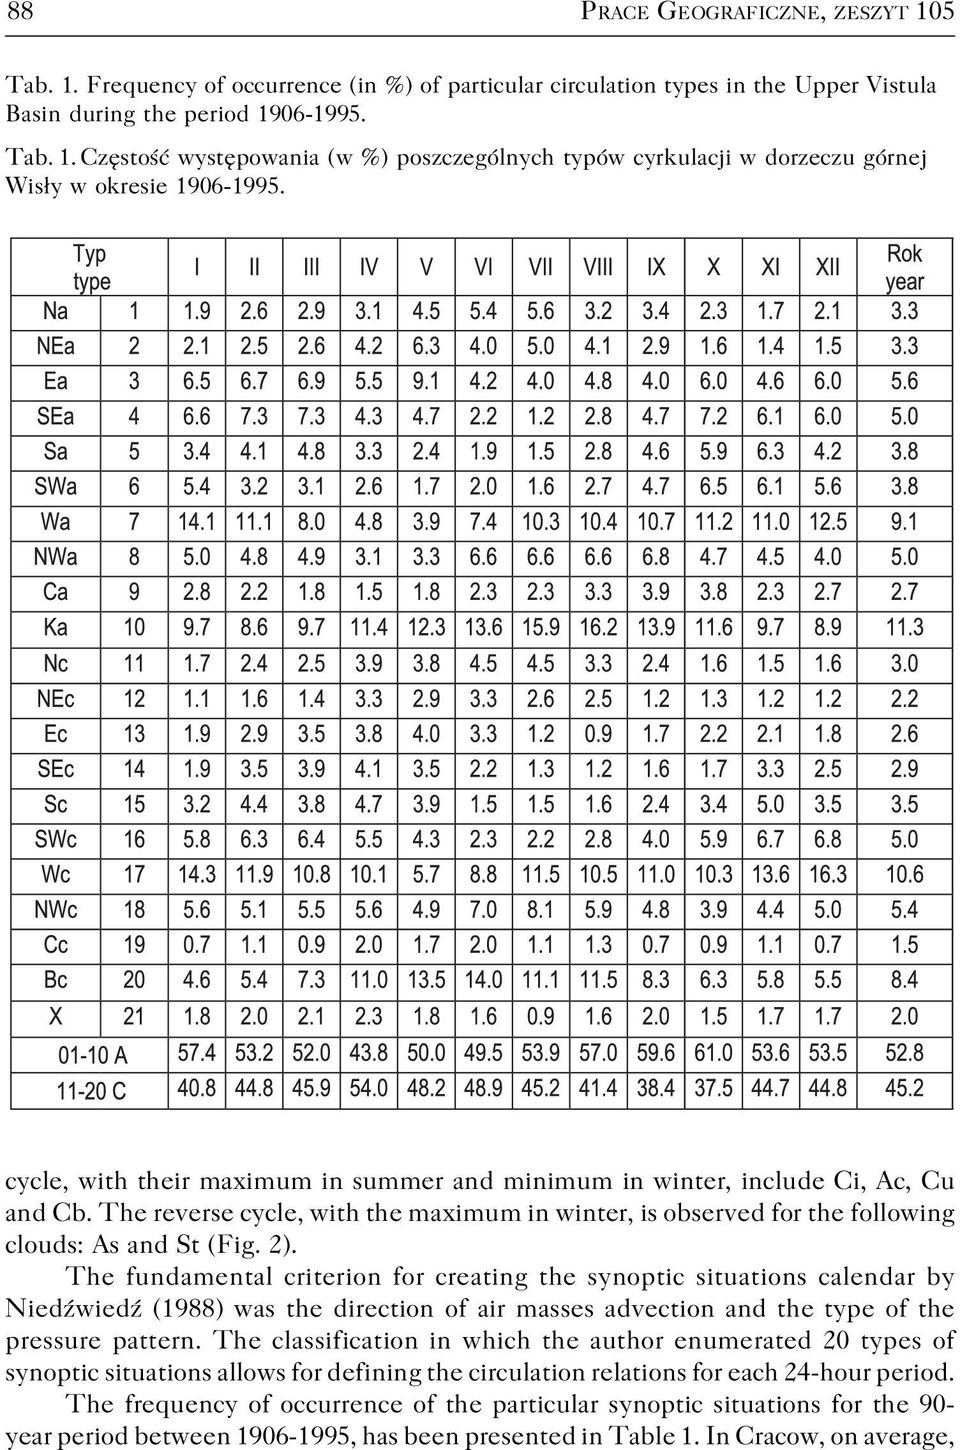 The fundamental criterion for creating the synoptic situations calendar by Niedźwiedź (1988) was the direction of air masses advection and the type of the pressure pattern.